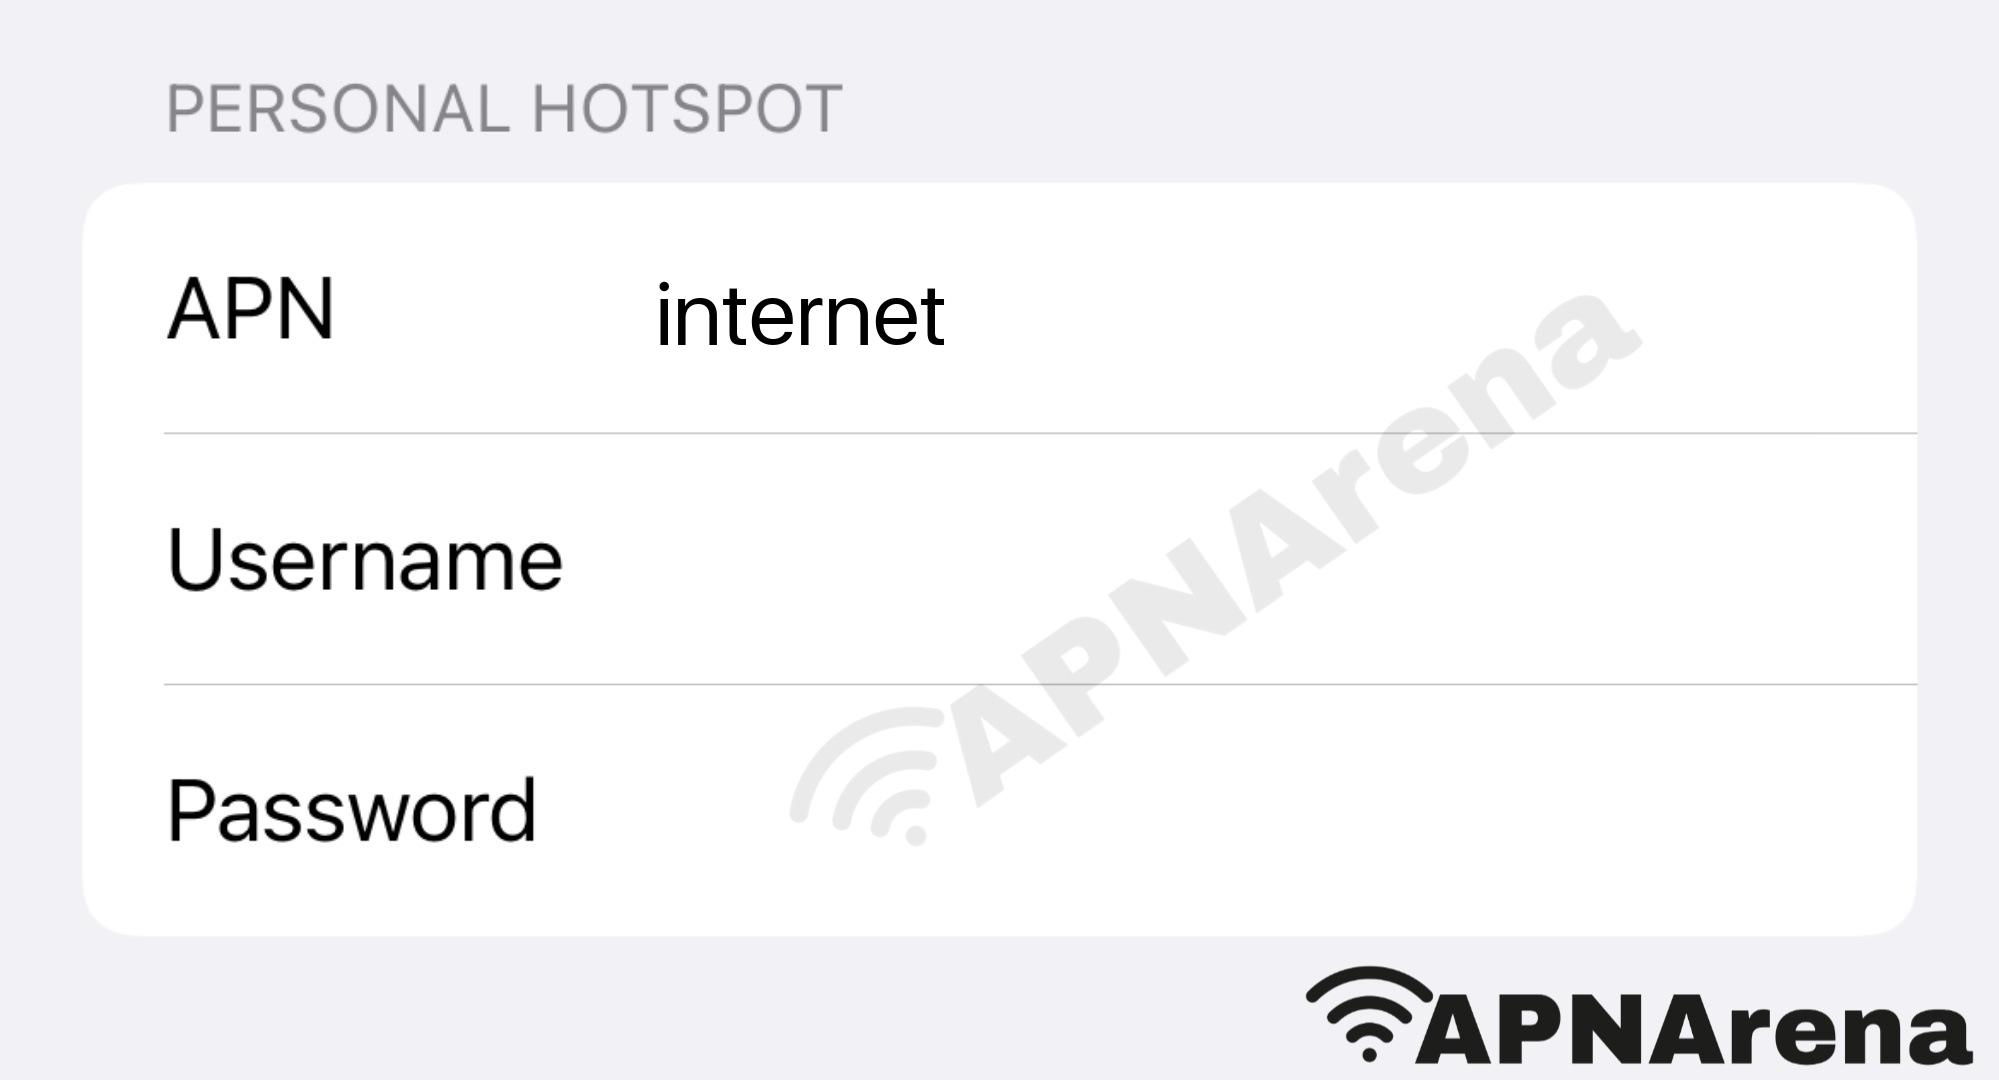 RED PLANS (CMOBILE) Personal Hotspot Settings for iPhone